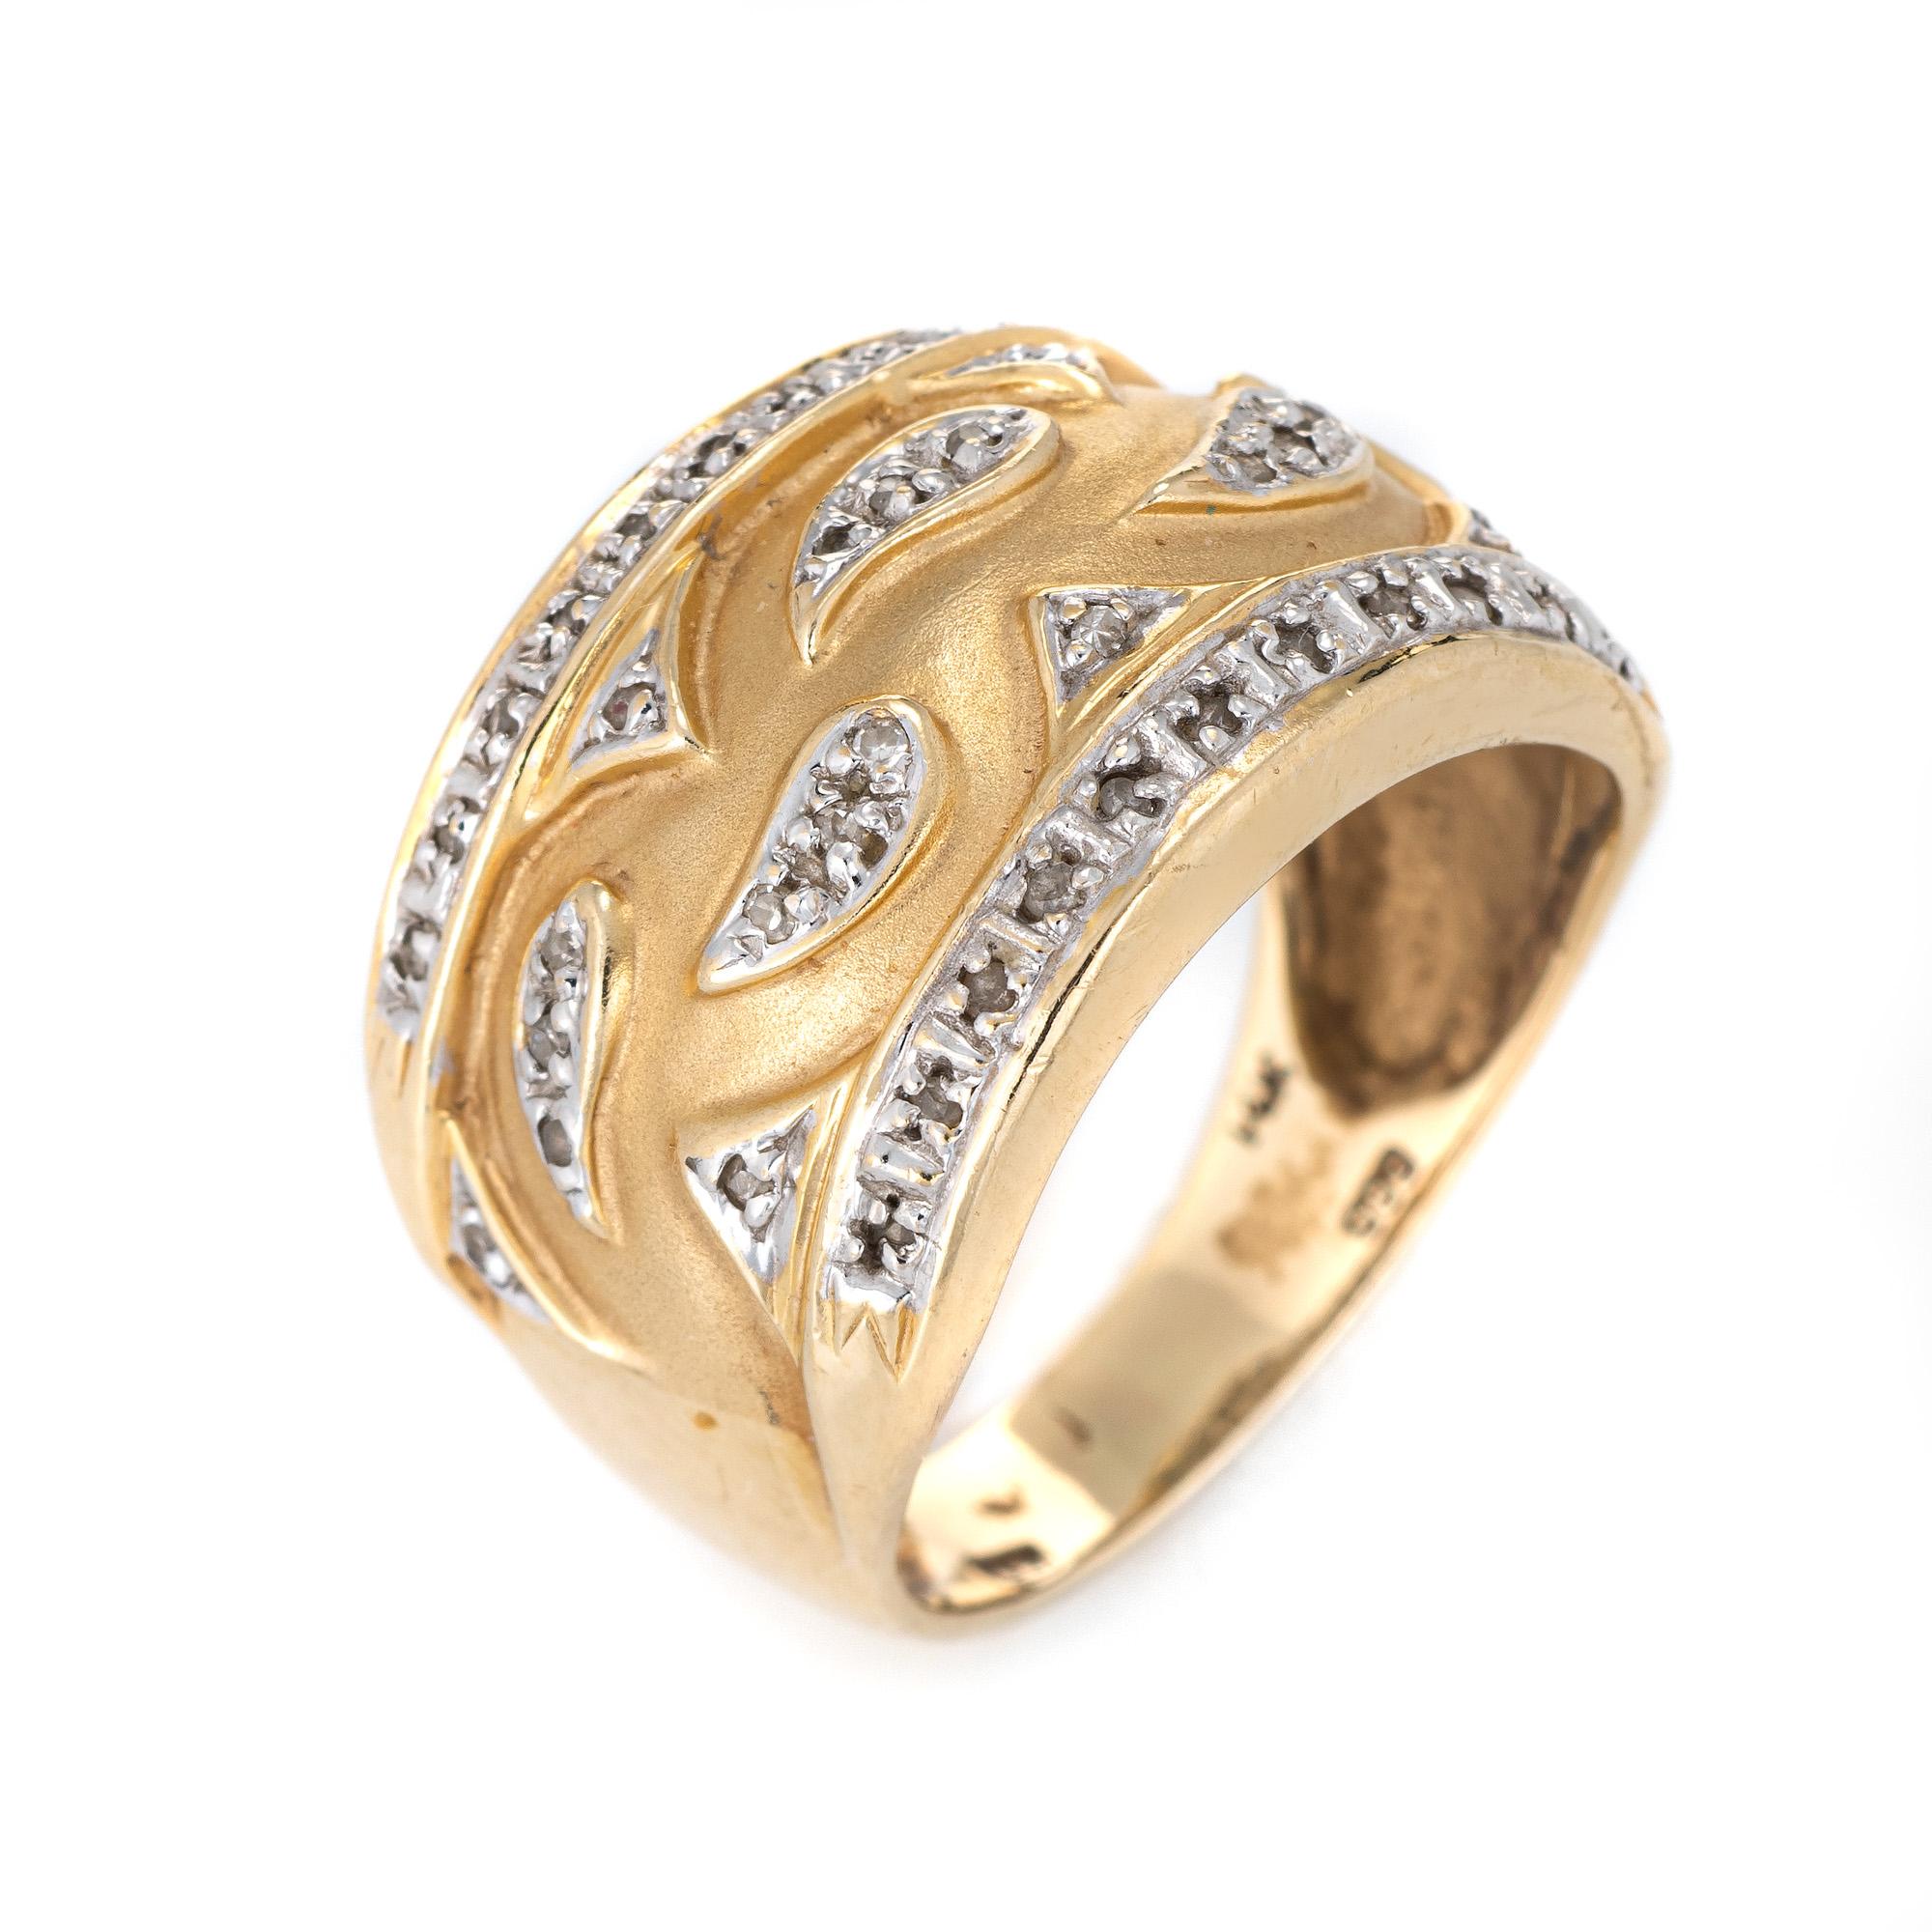 Stylish vintage wide band cigar band crafted in 14 karat yellow gold. 

Diamonds total an estimated 0.20 carats (estimated at I-J color and I1-2 clarity).  

The diamonds are set into a wave like design against a muted gold backdrop. The wide band